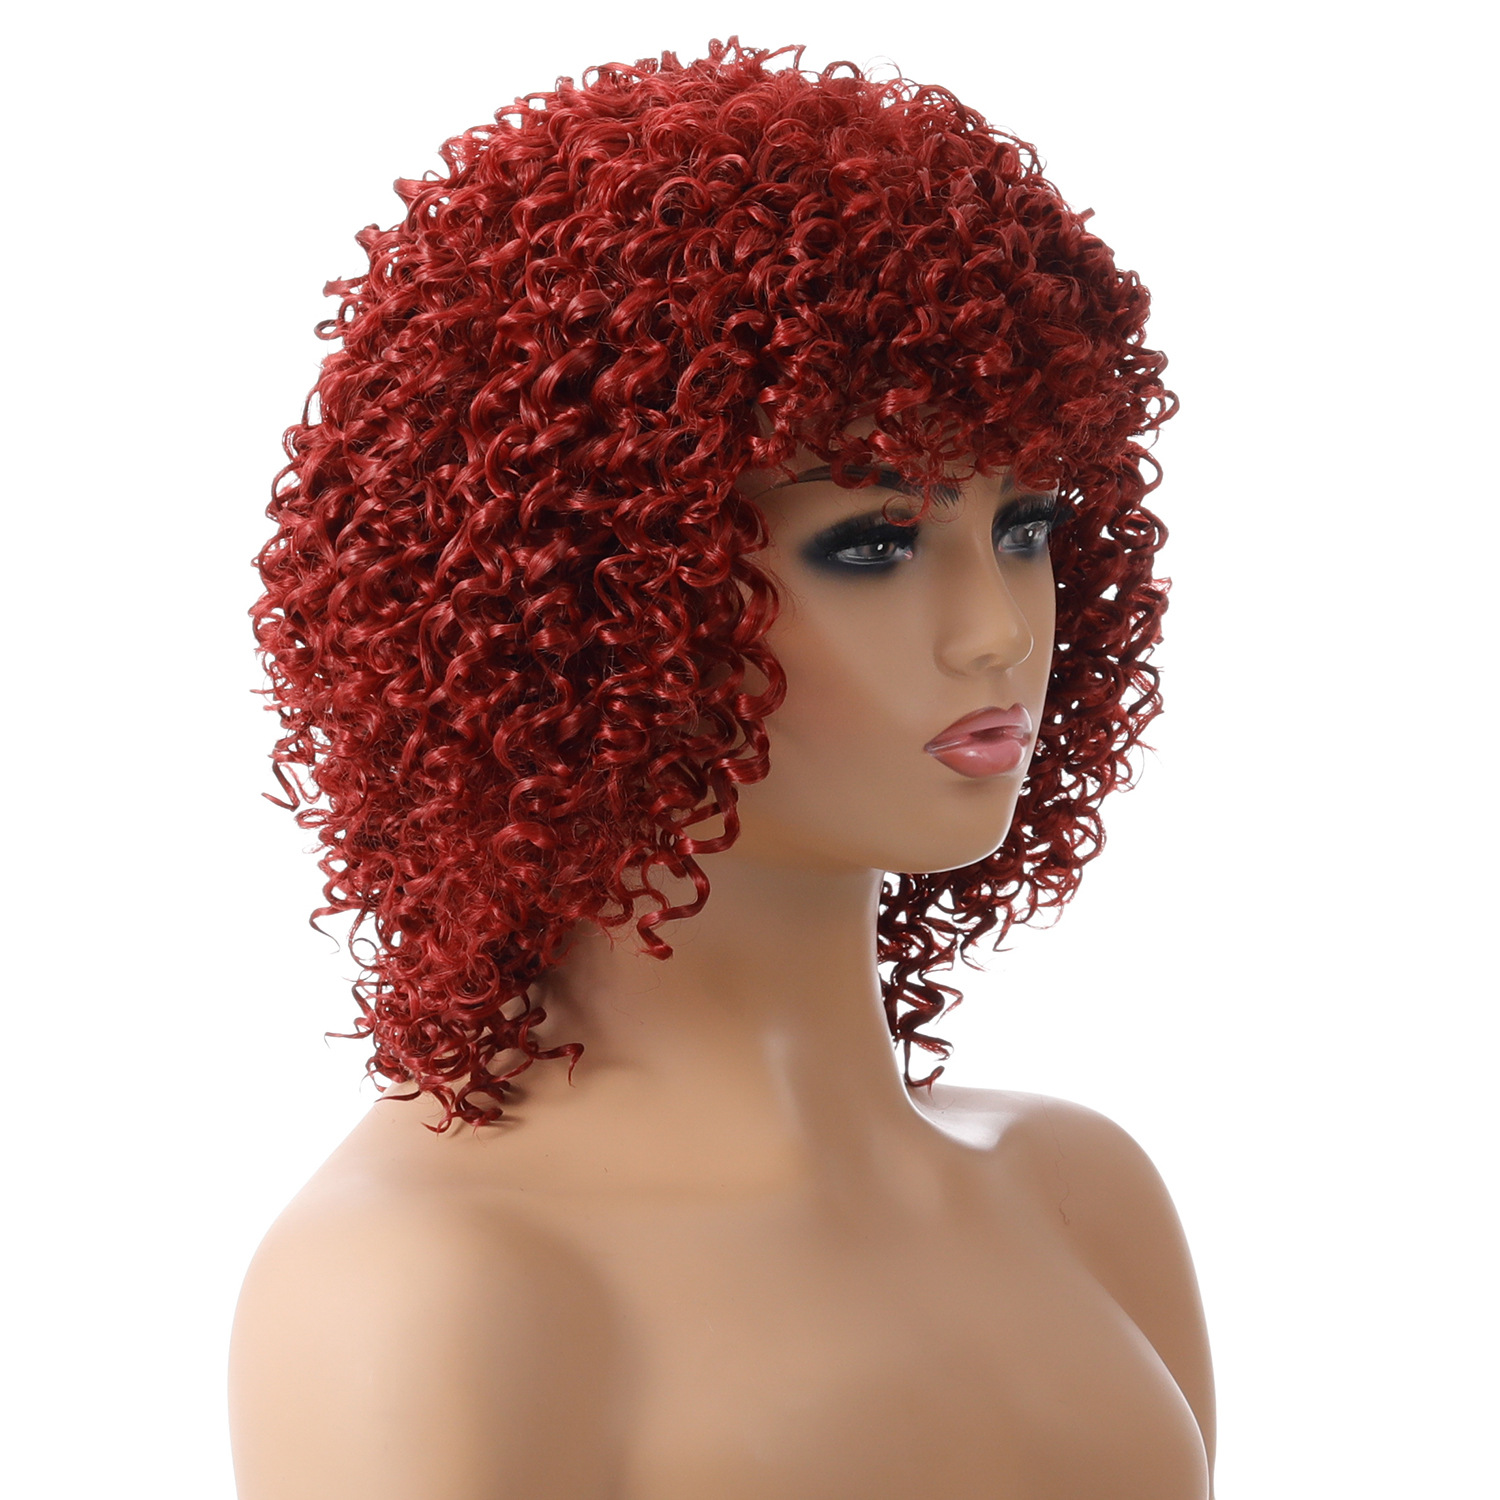 A synthetic wig with small, curly, and colorful hair strands